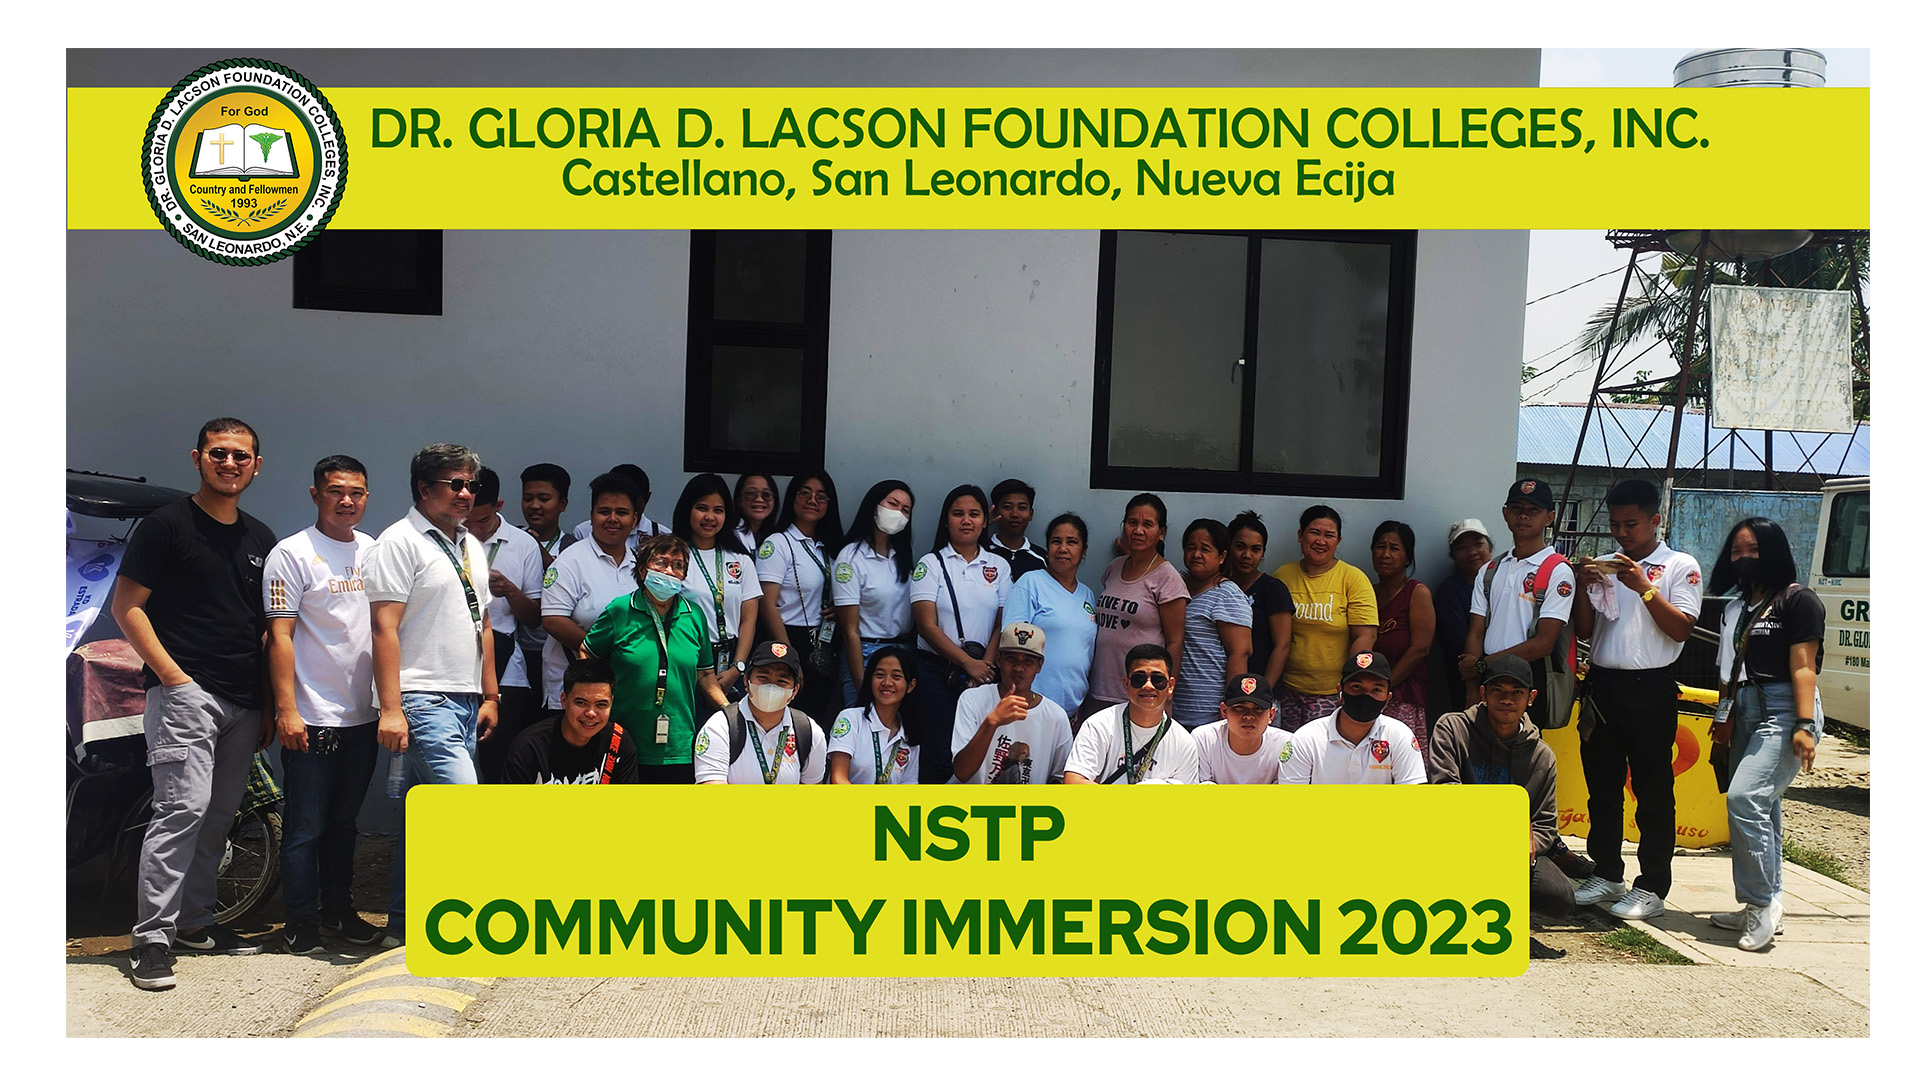 NSTP – Community Immersion 2023